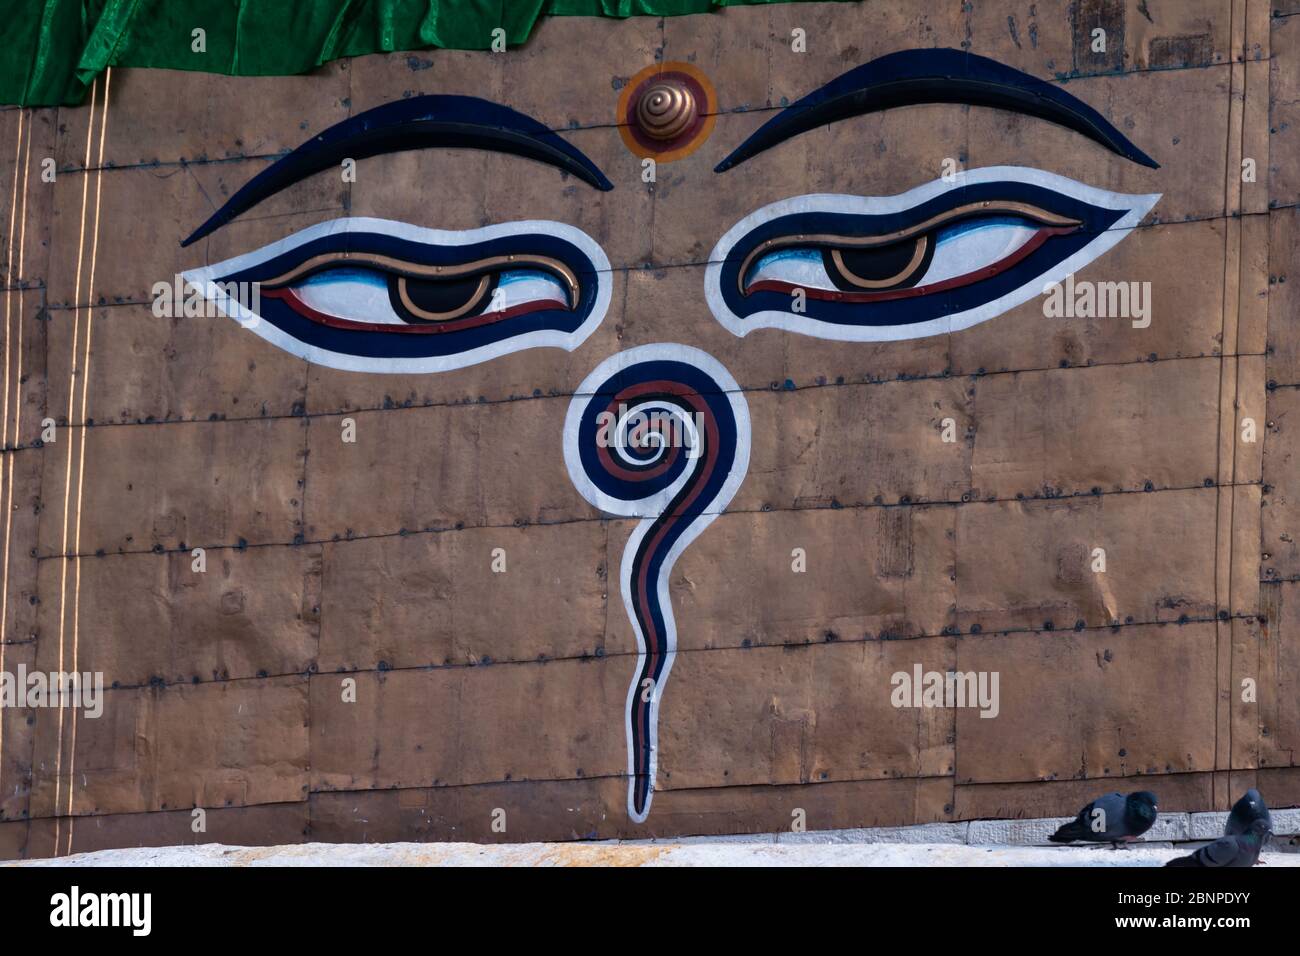 Wisdom eyes of Buddha at Swayambhunath, Kathmandu, Nepal, which is one of the World Heritage Site declared by UNESCO and is one of the top travel dest Stock Photo